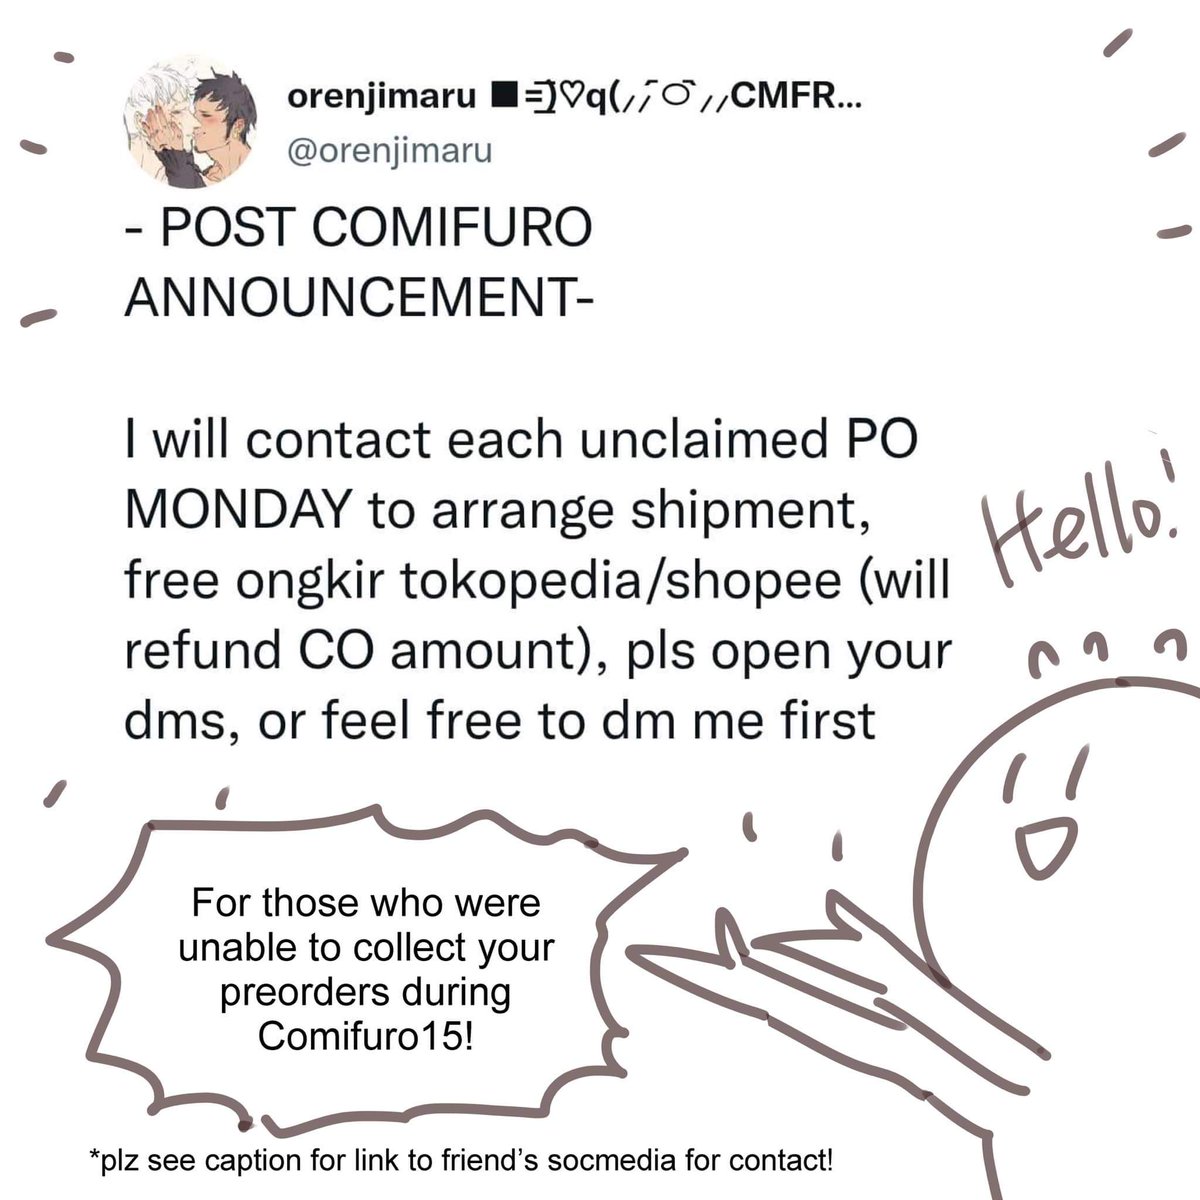 Hello, we understand many people were unable to enter ICE for Comifuro15, so plz dm @orenjimaru to follow up on Monday to arrange for shipping ~

Thanks 🙏!

And wow, the actual Comifuro15 crowd photos sure is amazing, wow 